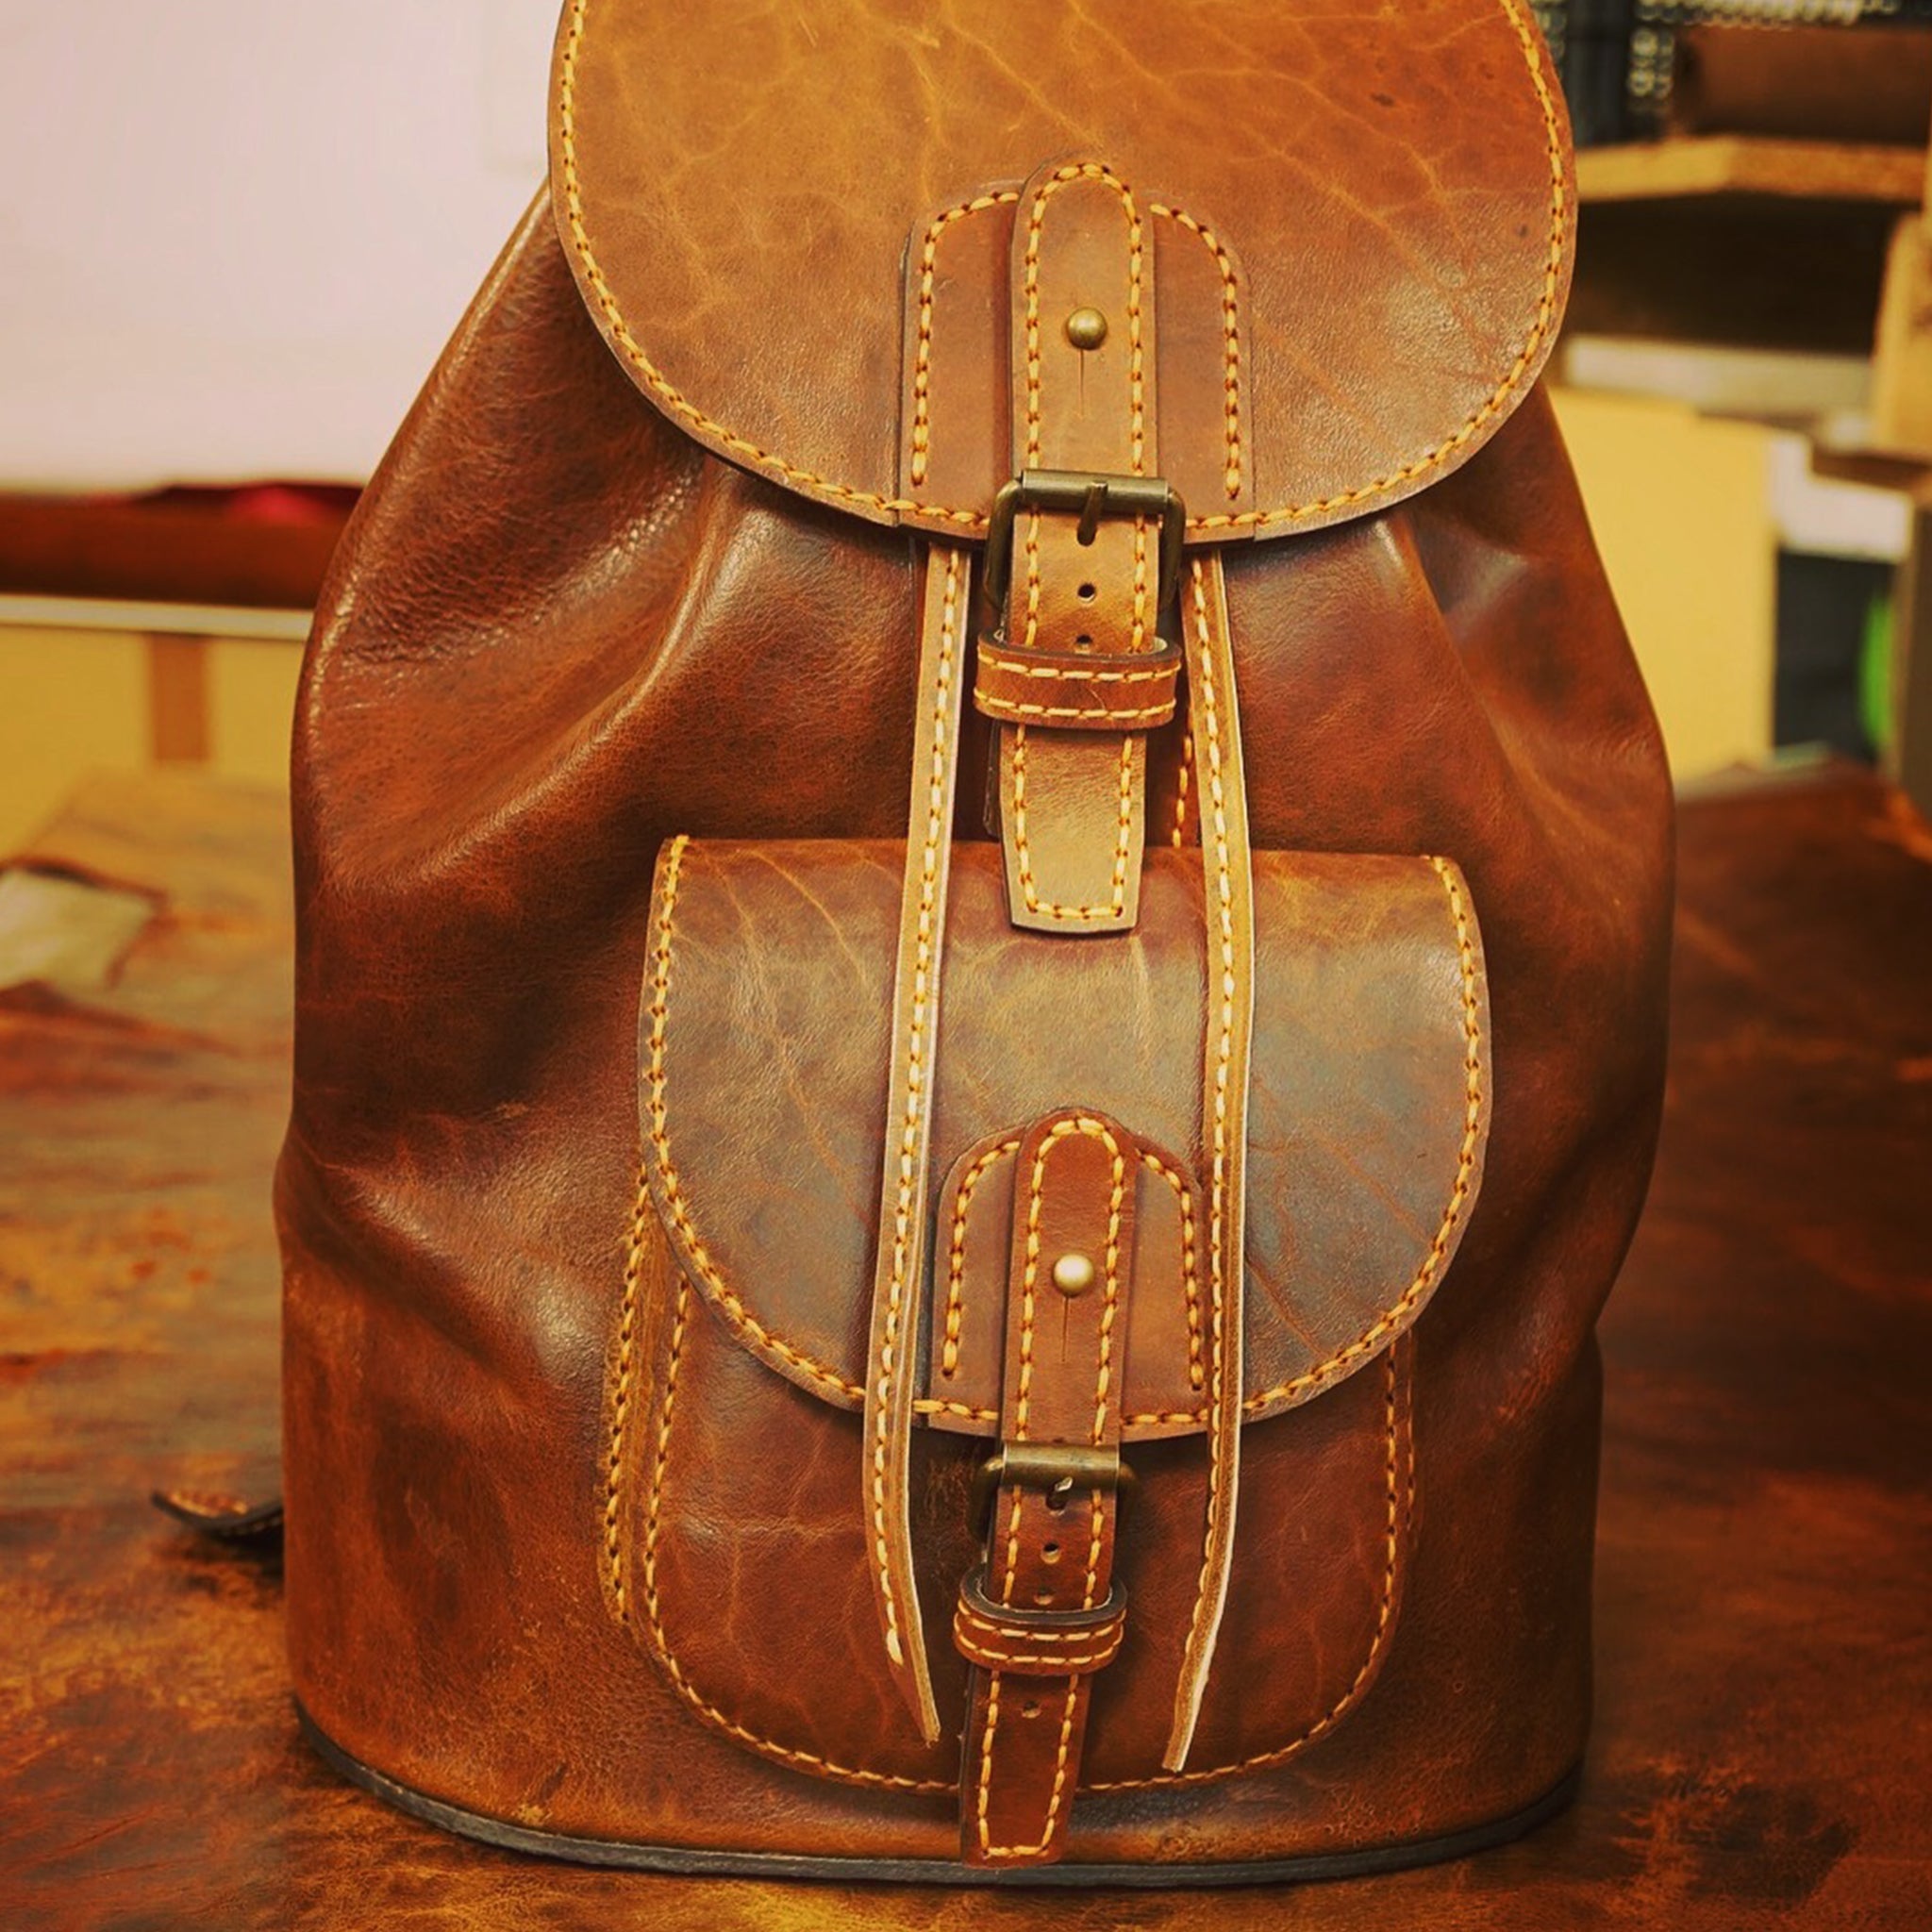 Harper Backpack, PDF Pattern and Instructional Video by Vasile and Pavel - Vasile and Pavel Leather Patterns